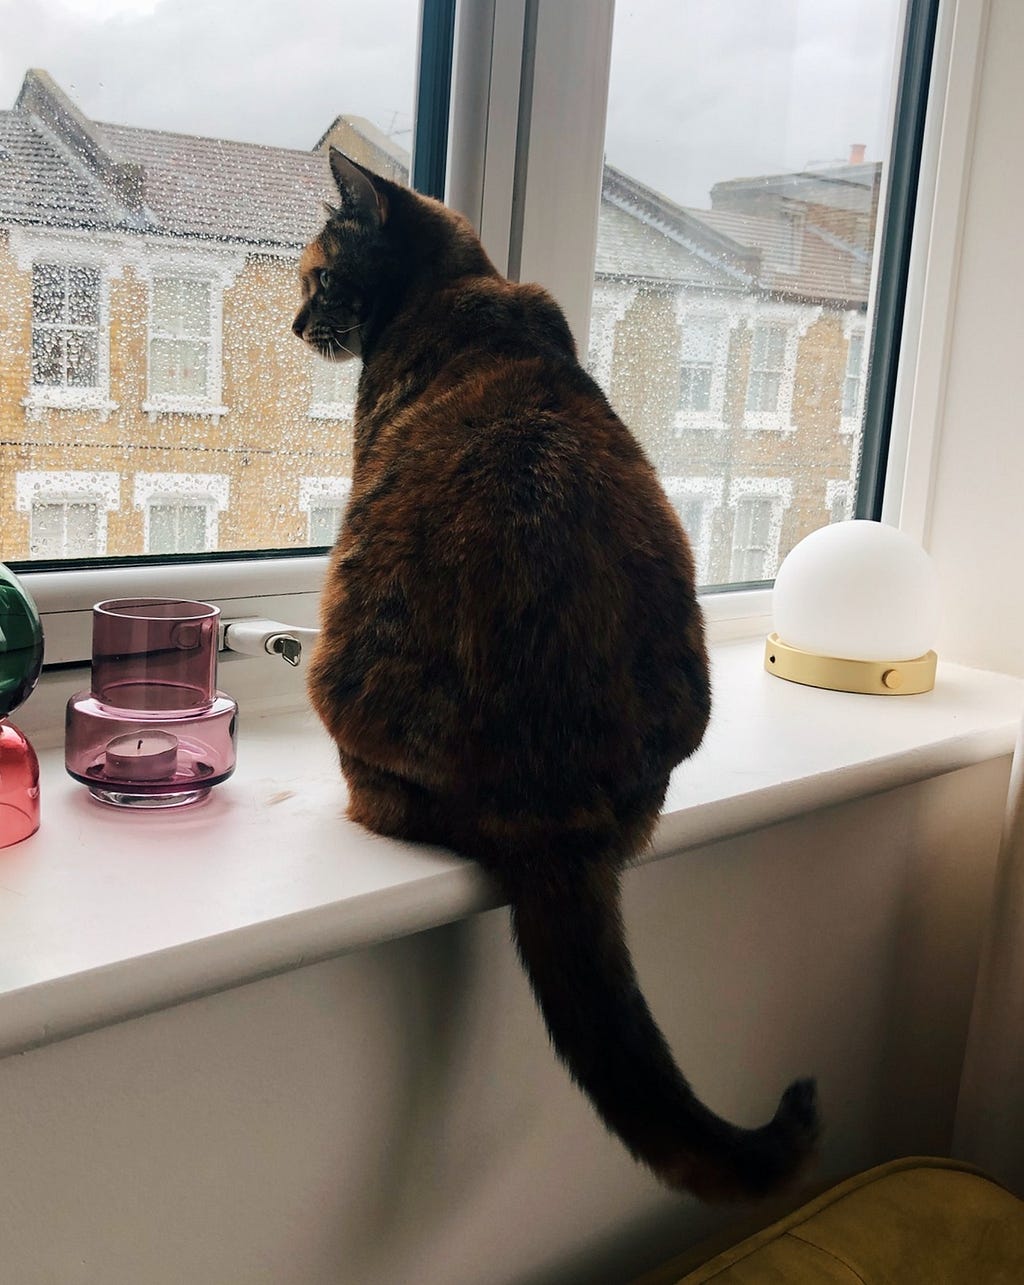 A brown cat called Bruno is sitting on a window ledge, looking out on a rainy day.